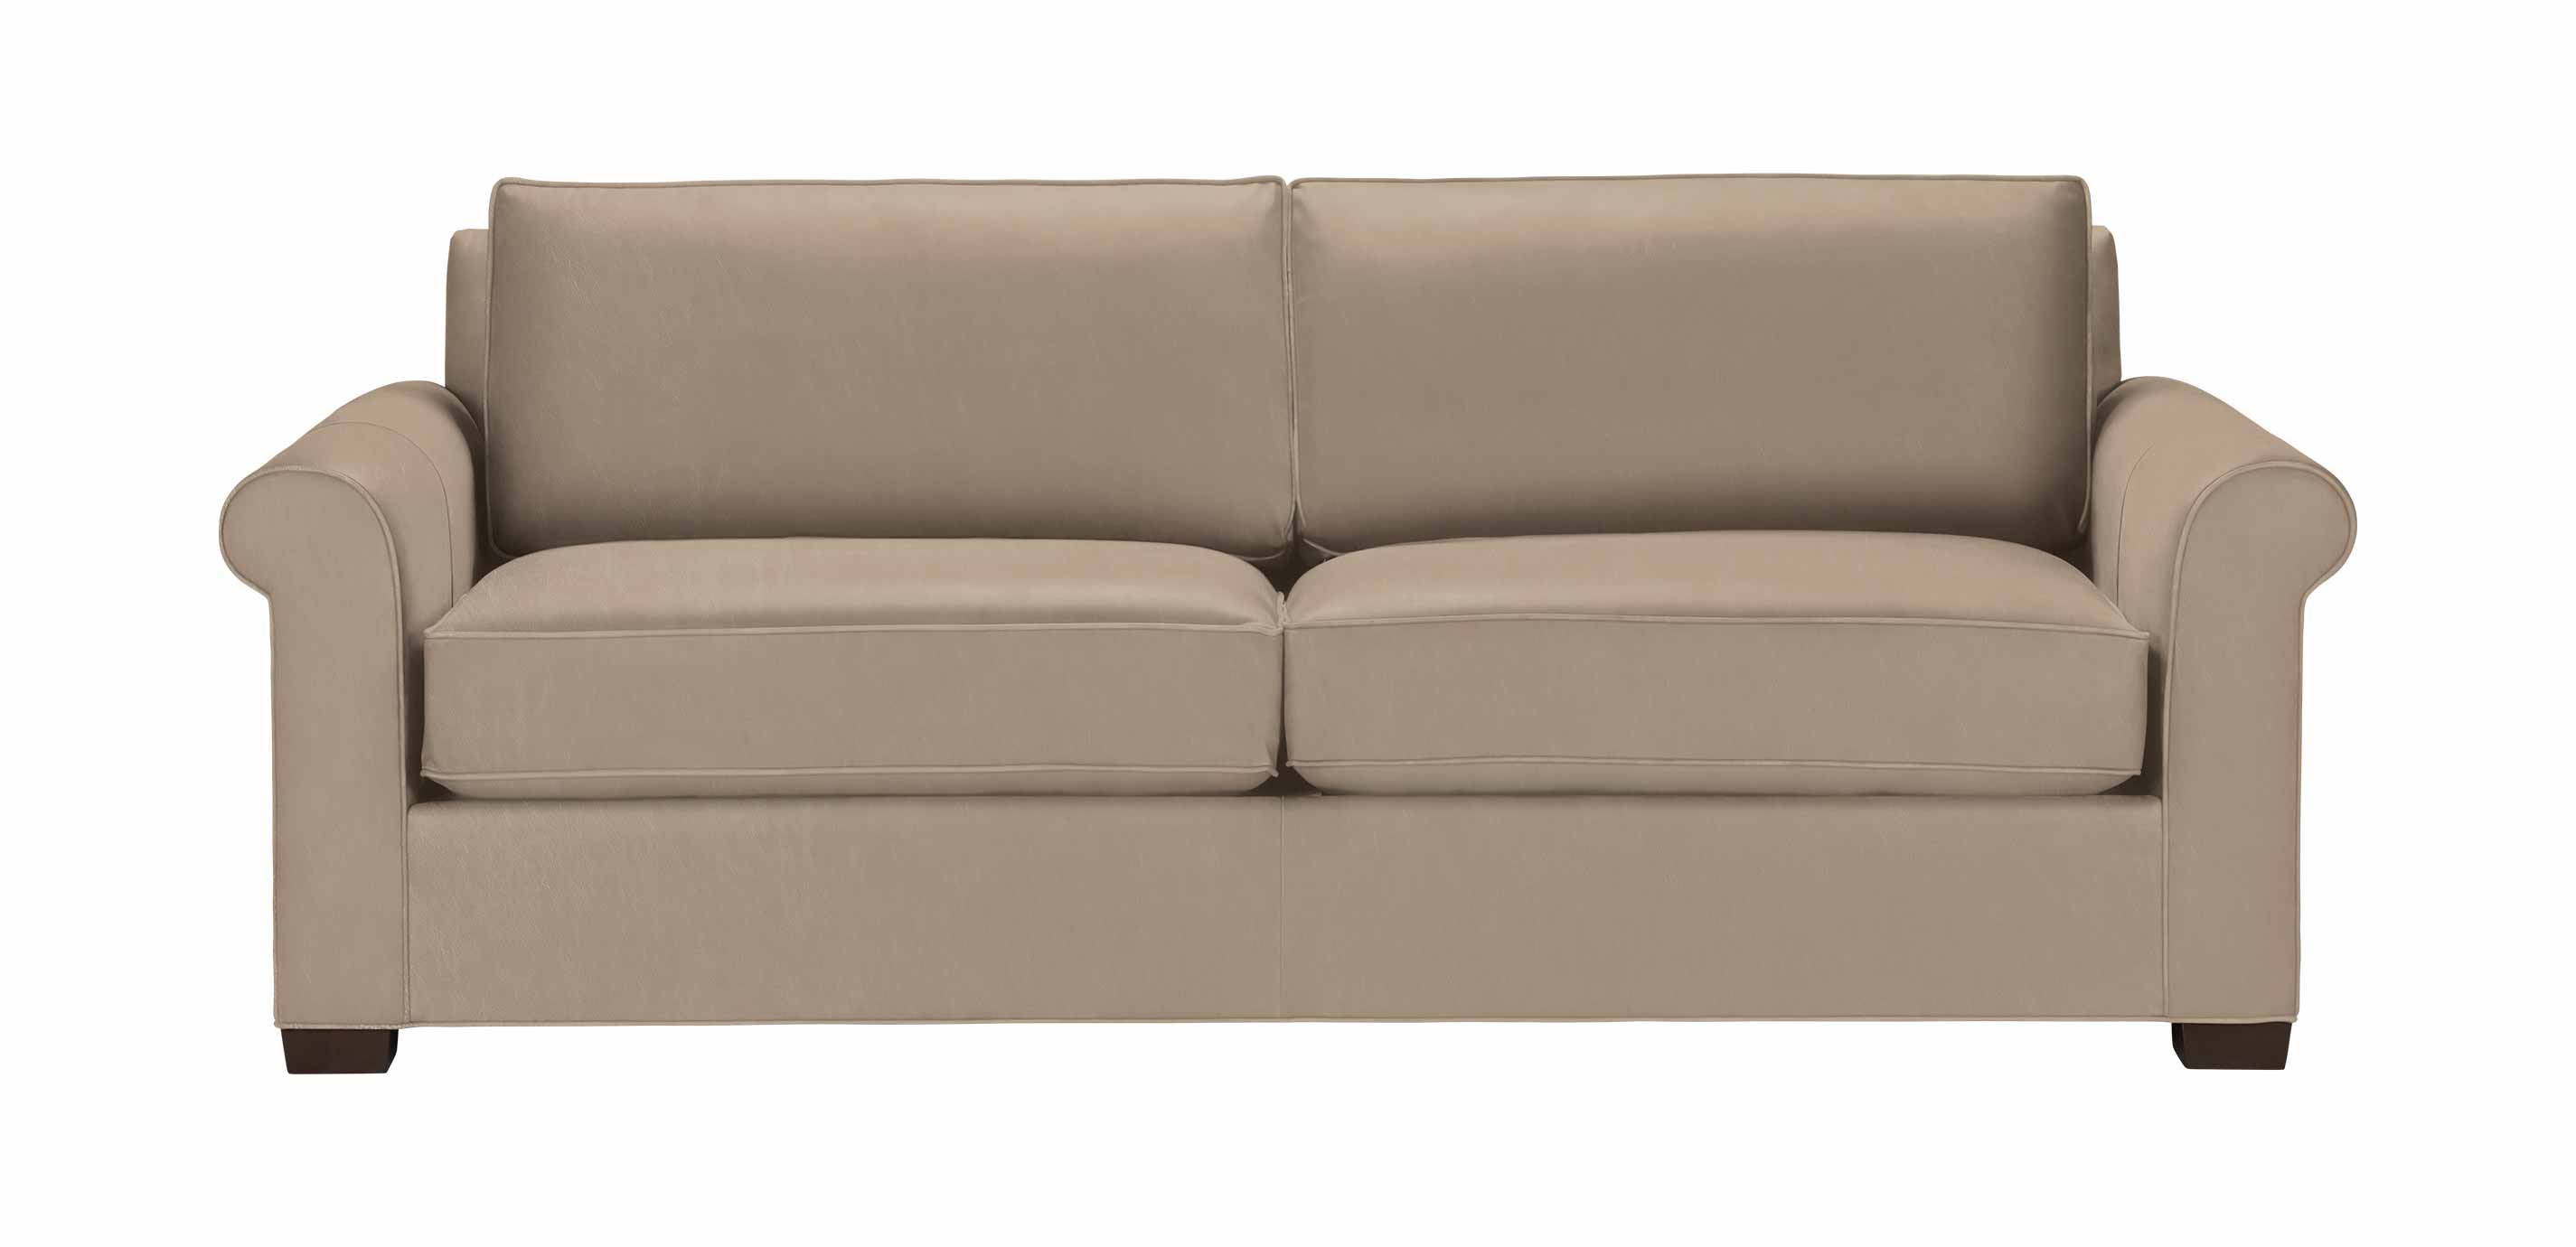 Spencer Roll Arm Leather Sofa, Ethan Allen Leather Sofa Reviews